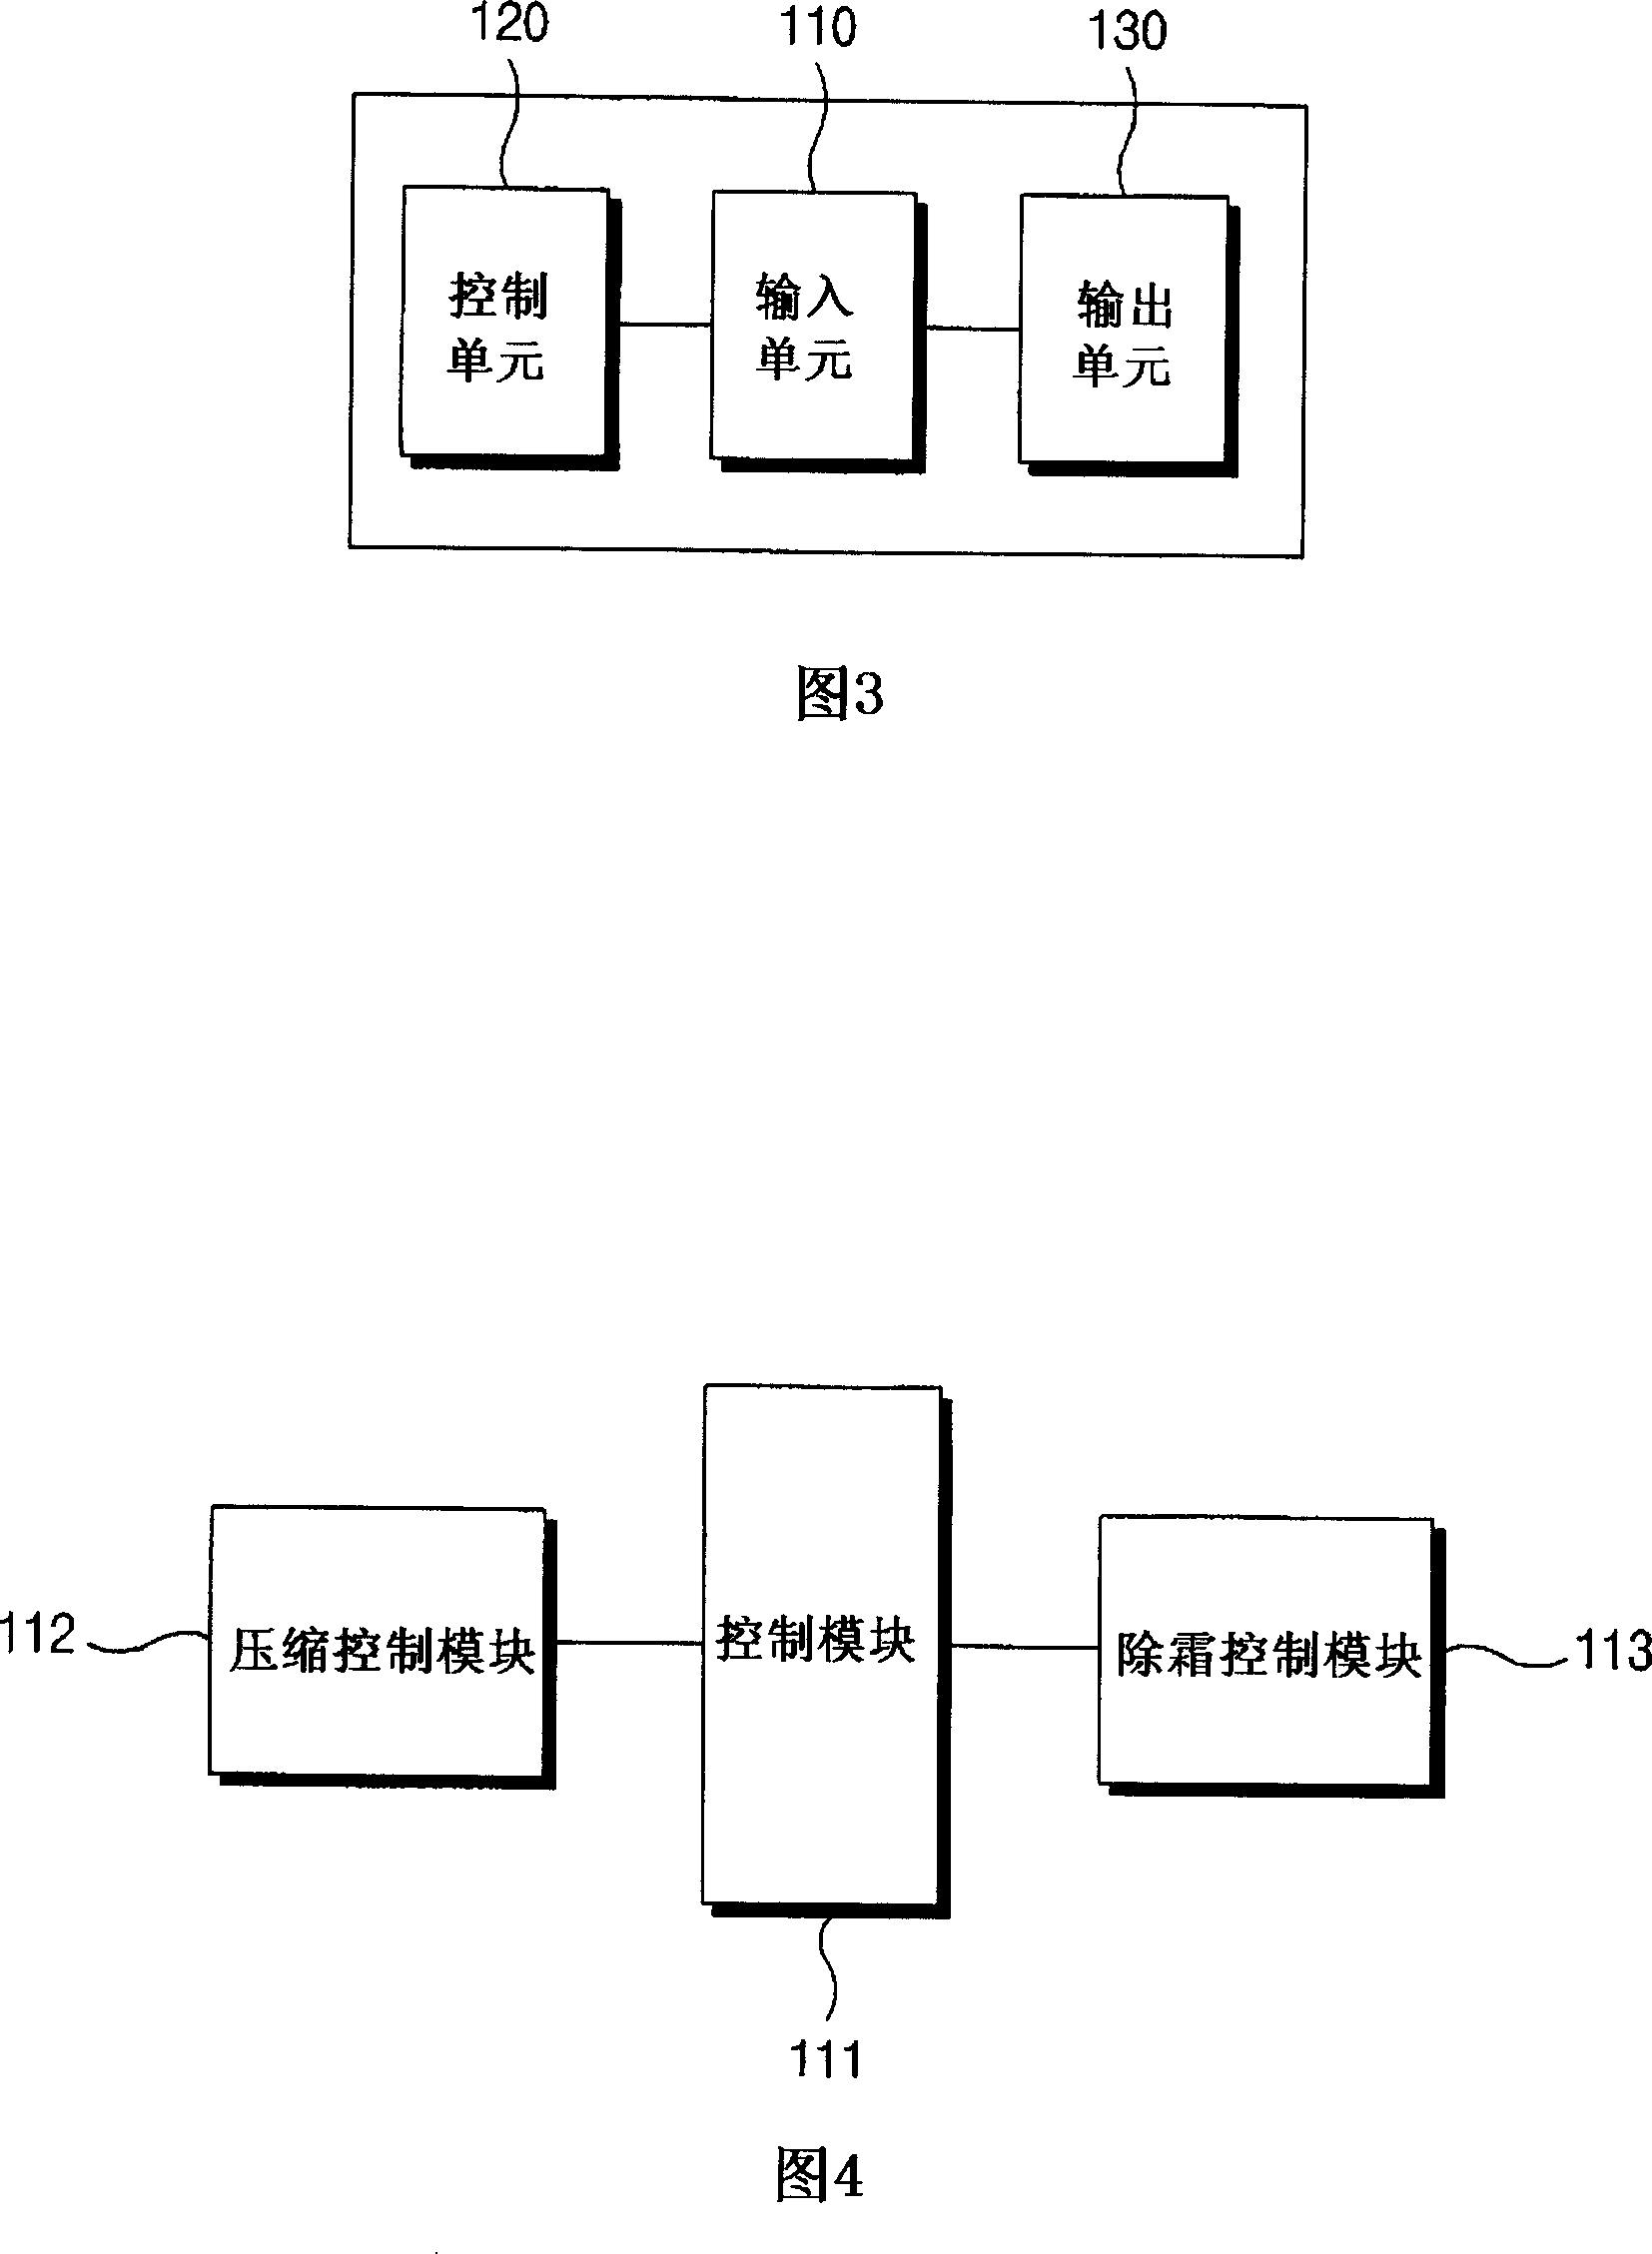 Electronic defrost timer for mechanical refrigerator